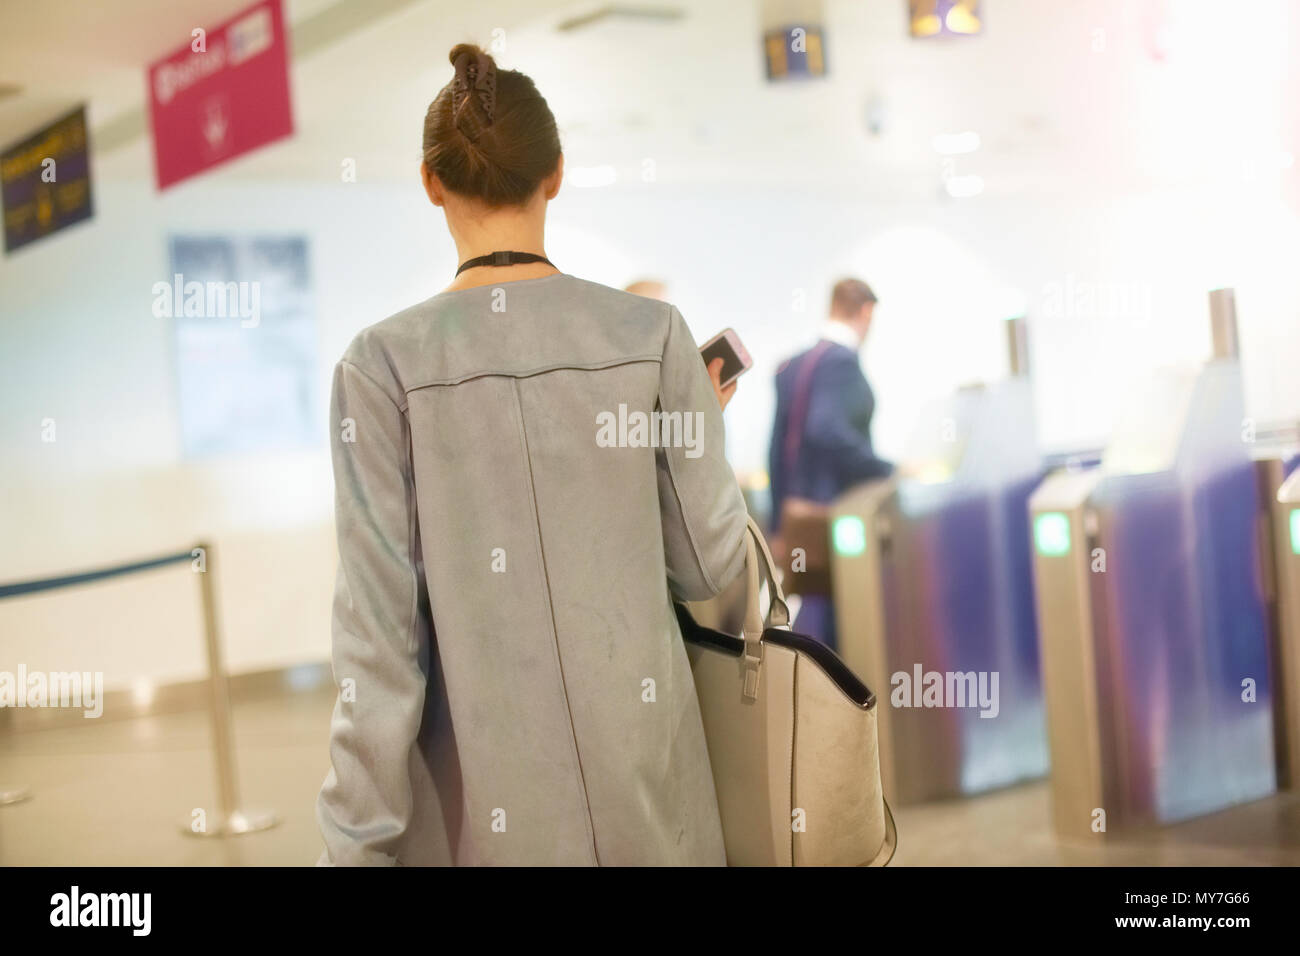 Businessmen and women walking through security gate at airport, rear view Stock Photo